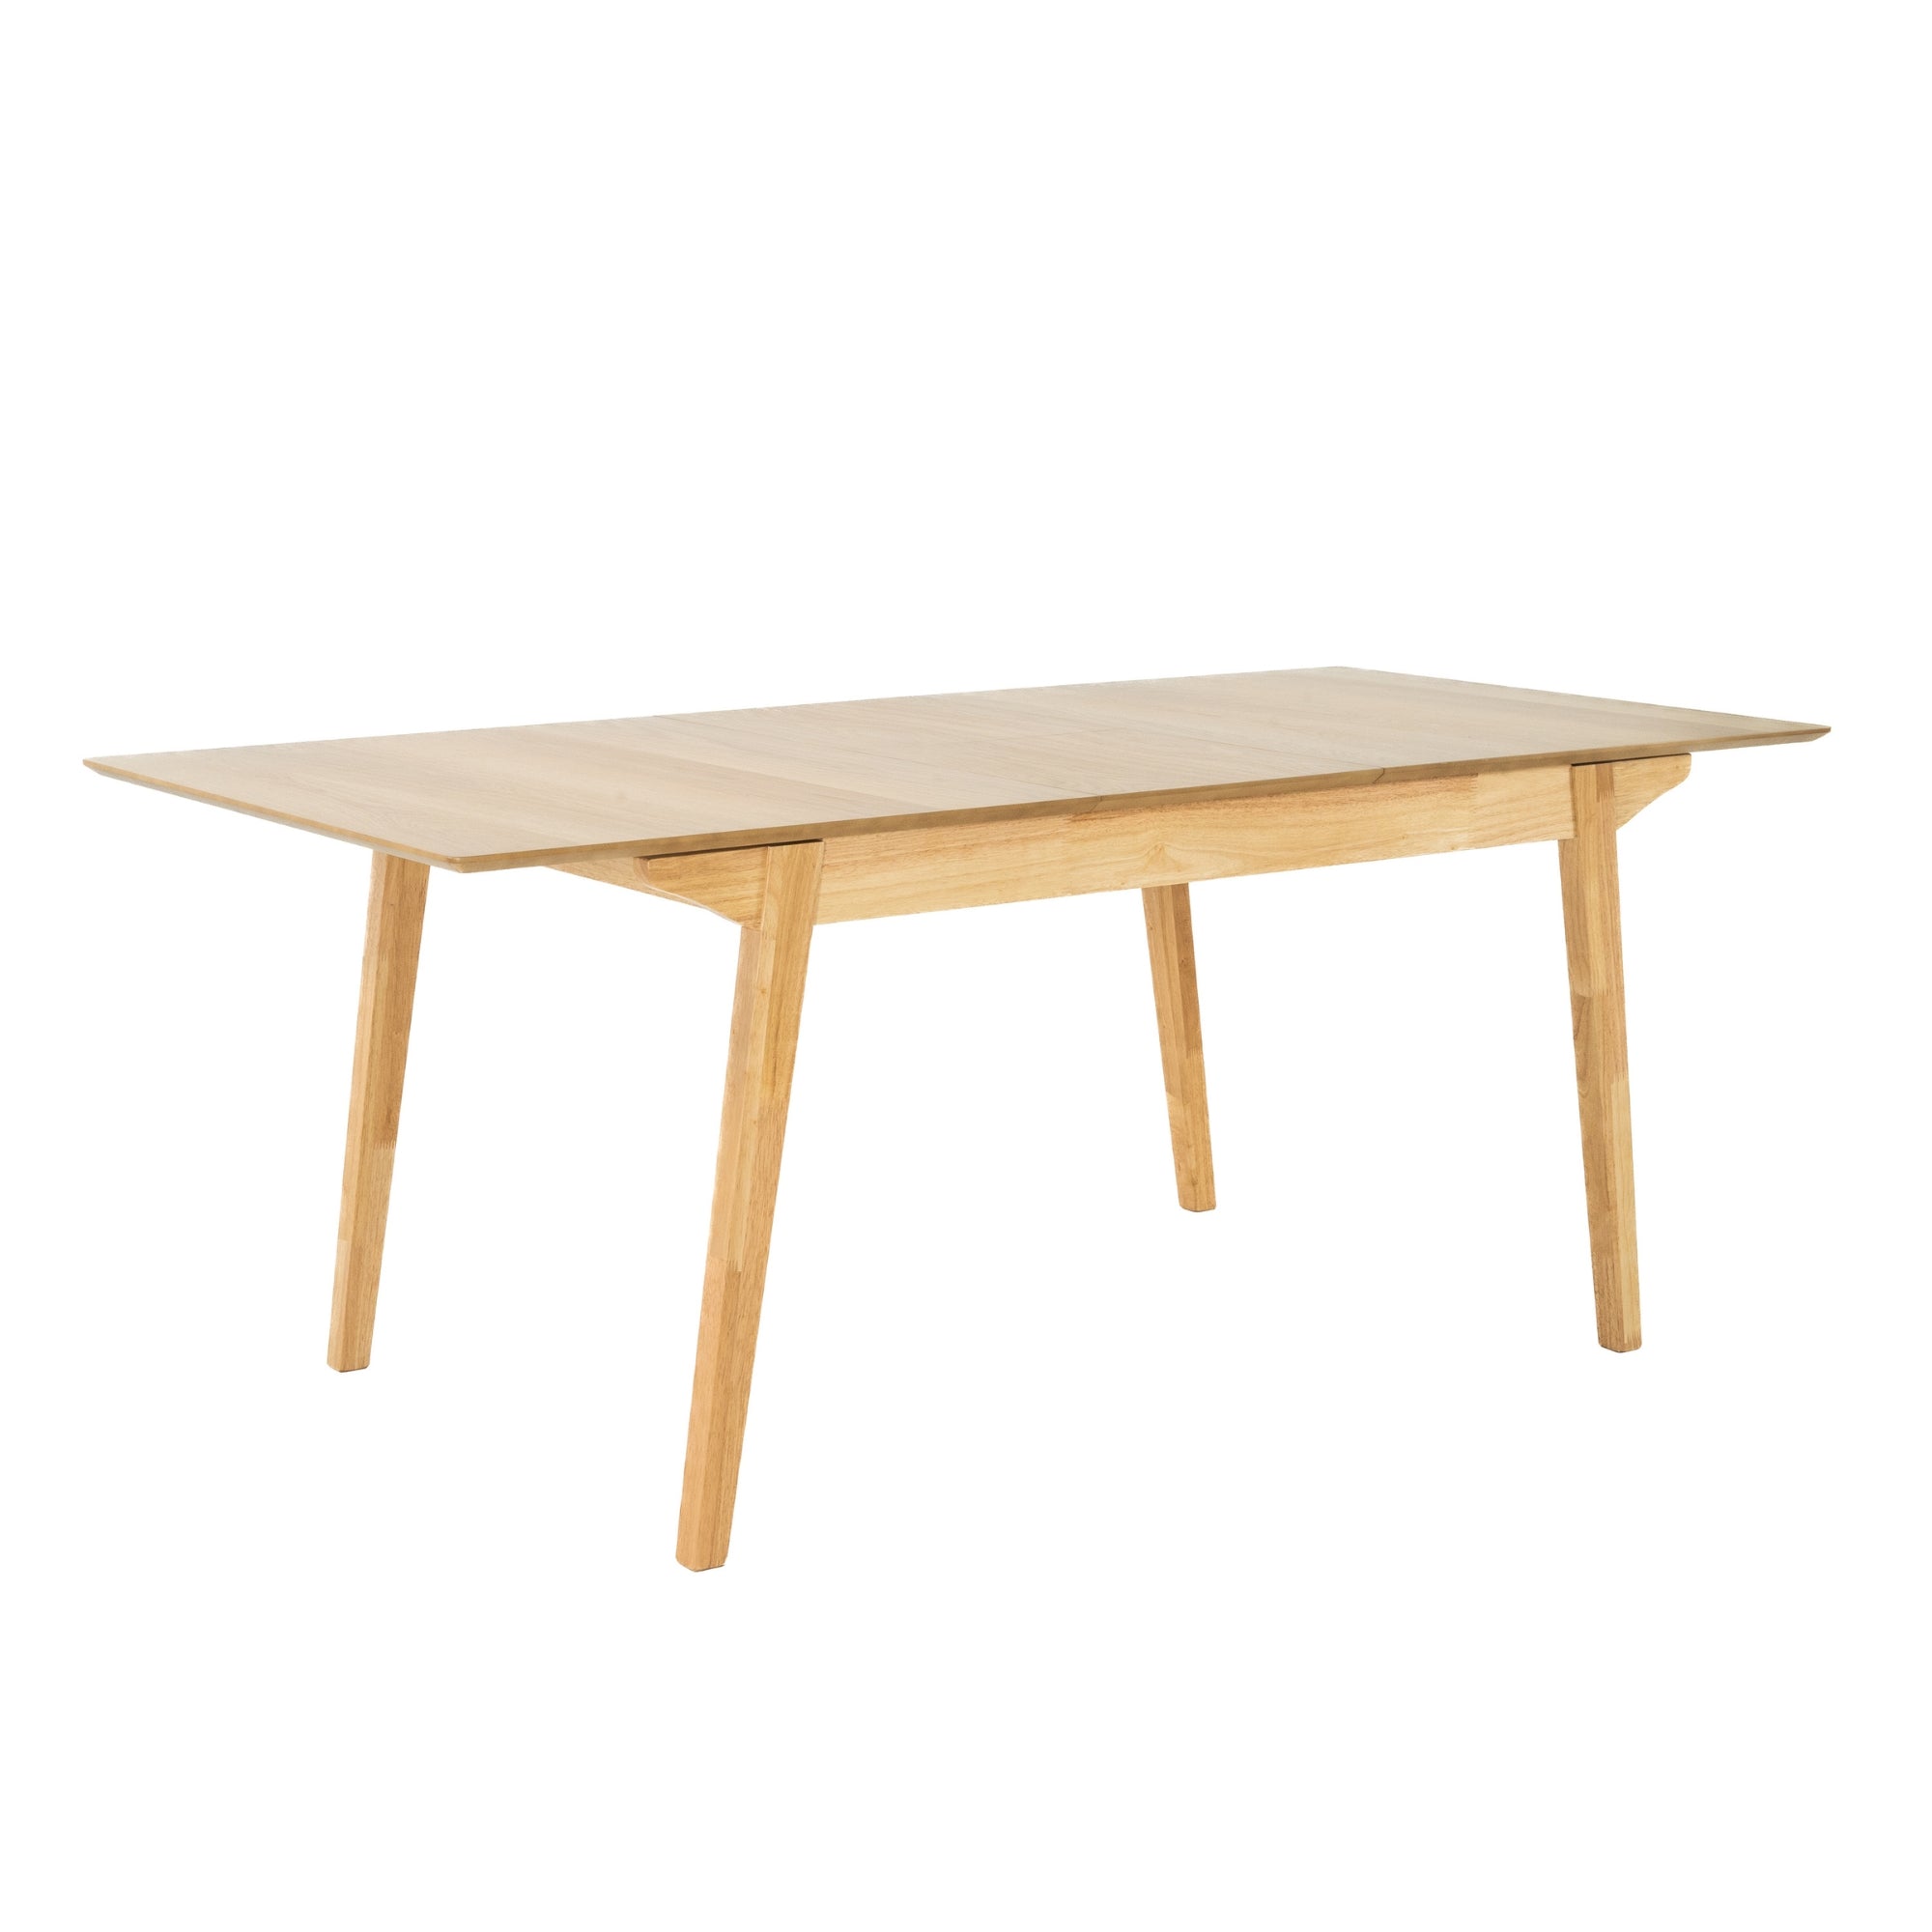 Extendable Scandinavian Dining Table, Solid Rubberwood, 8-Seater